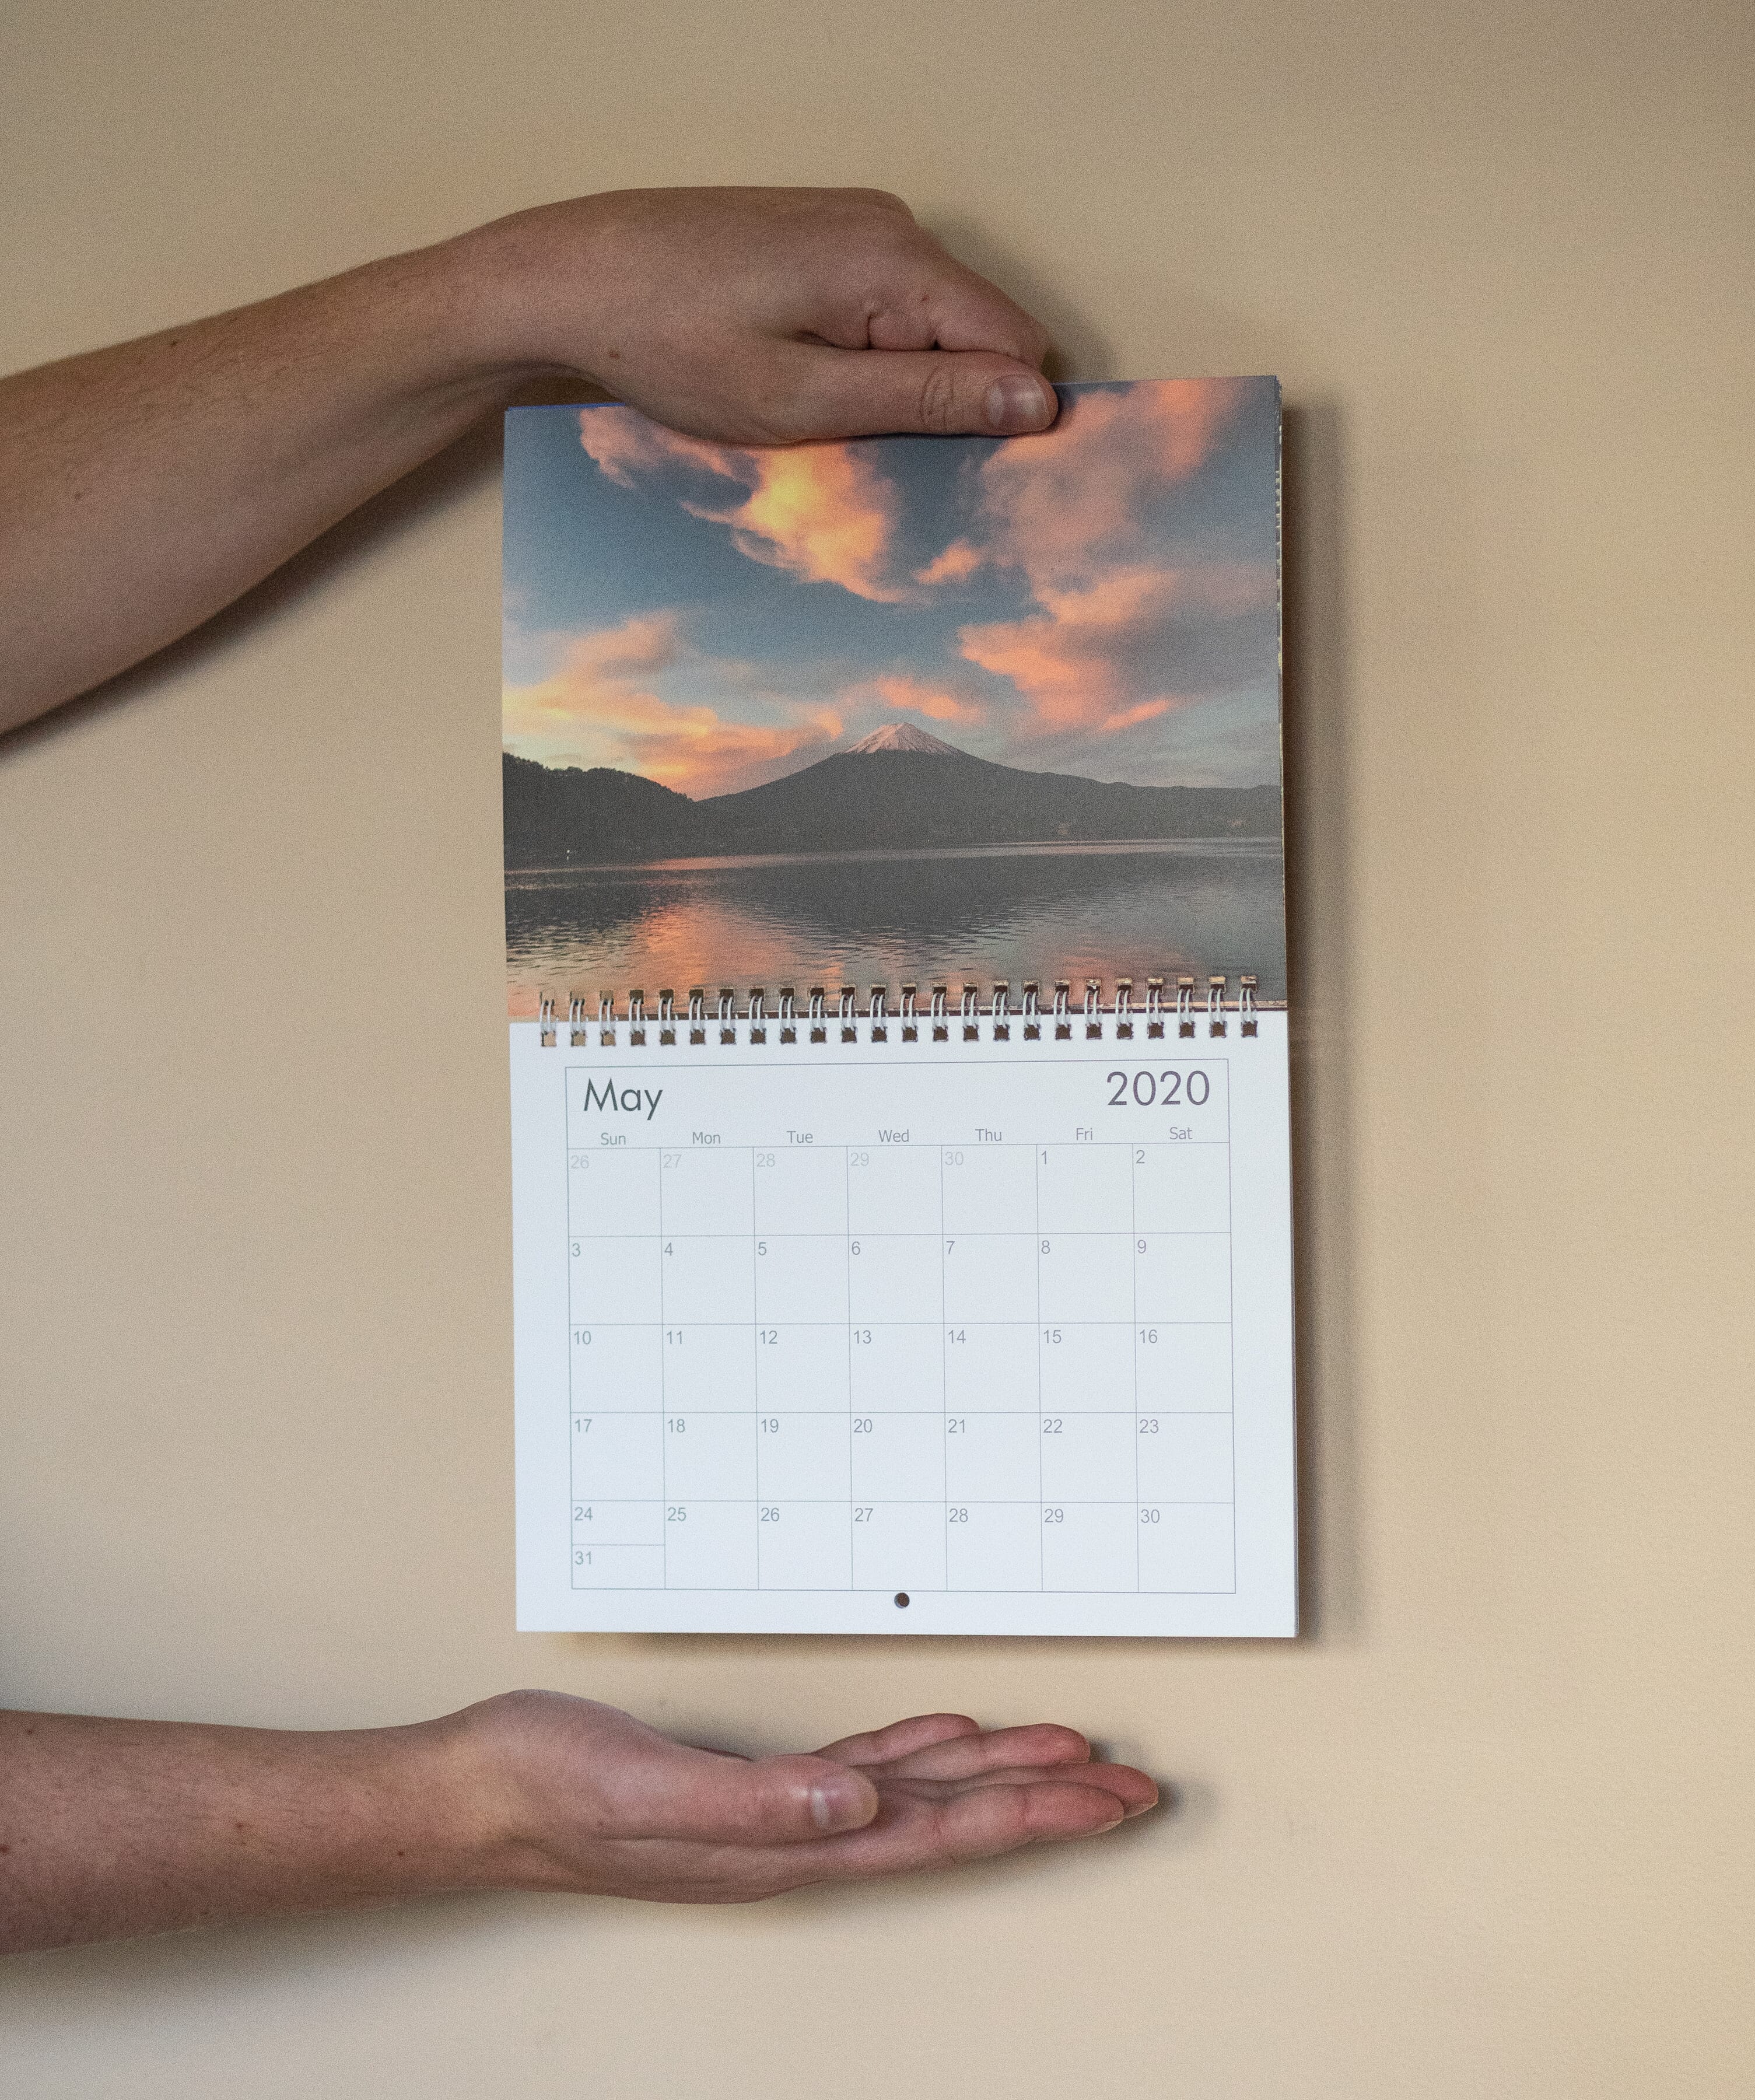 Personalized Photo Calendars for 2021: A Perfect Holiday Gift